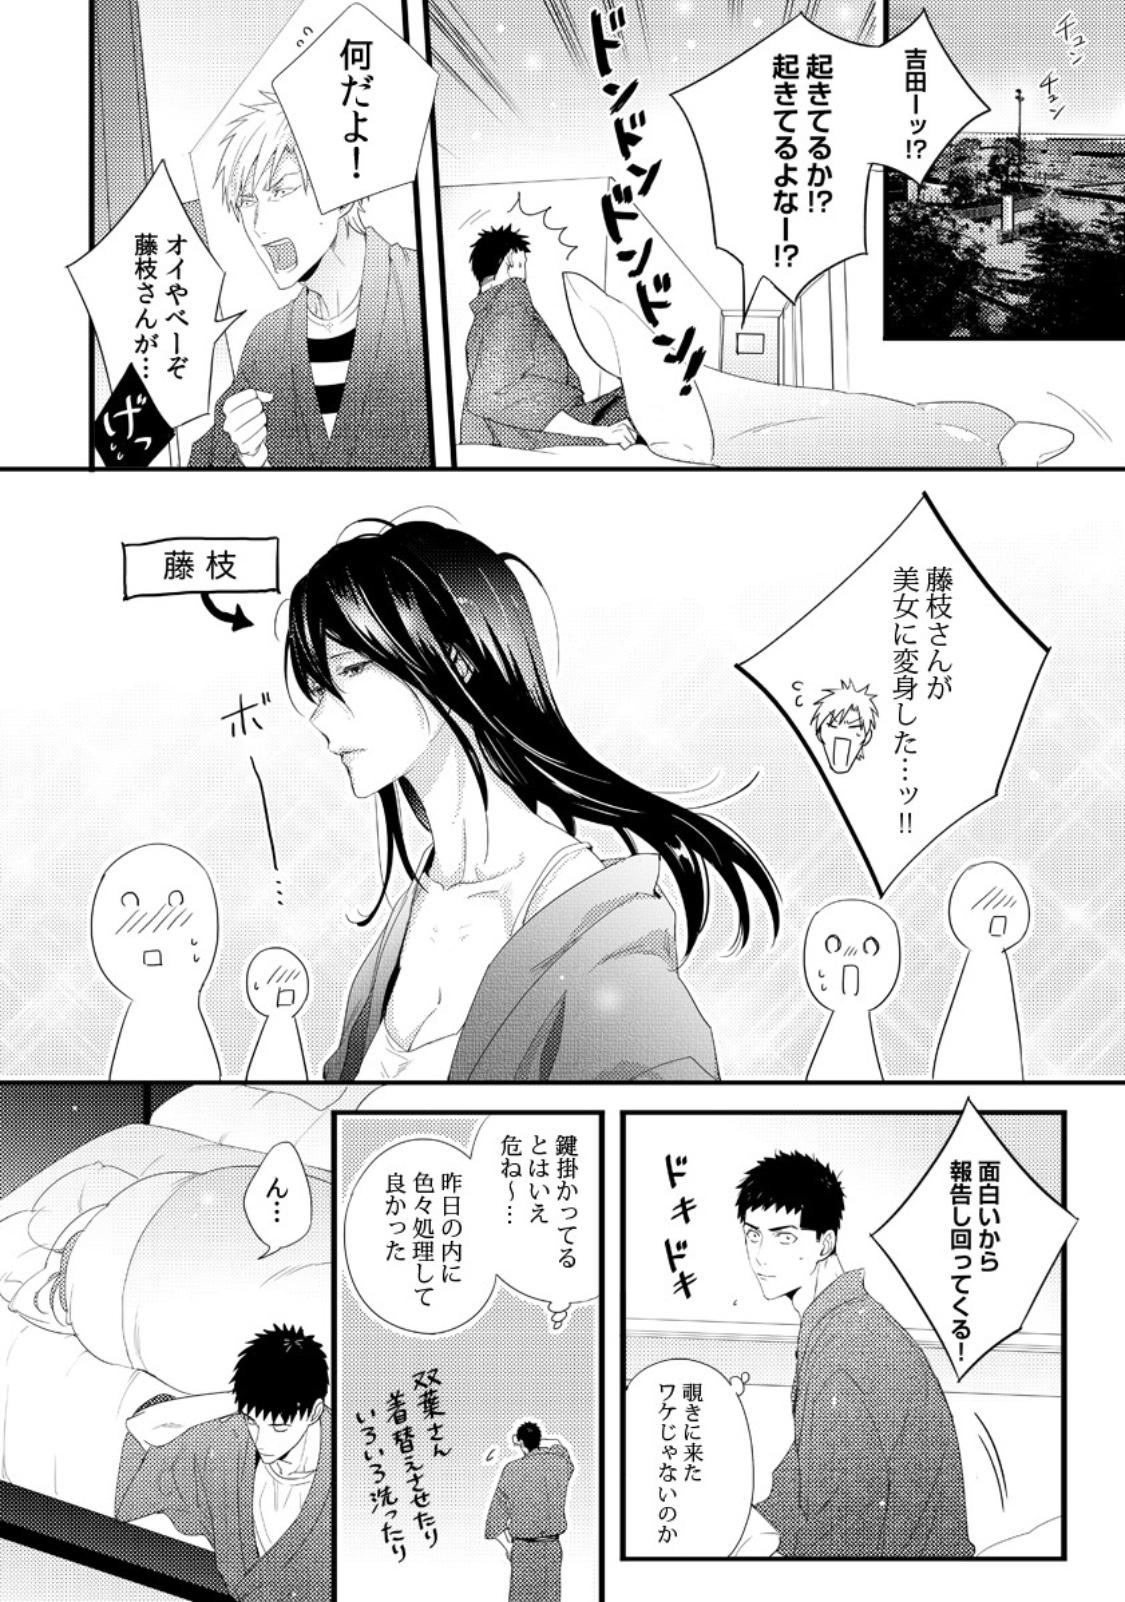 Please Let Me Hold You Futaba-San! Ch. 1-4 24